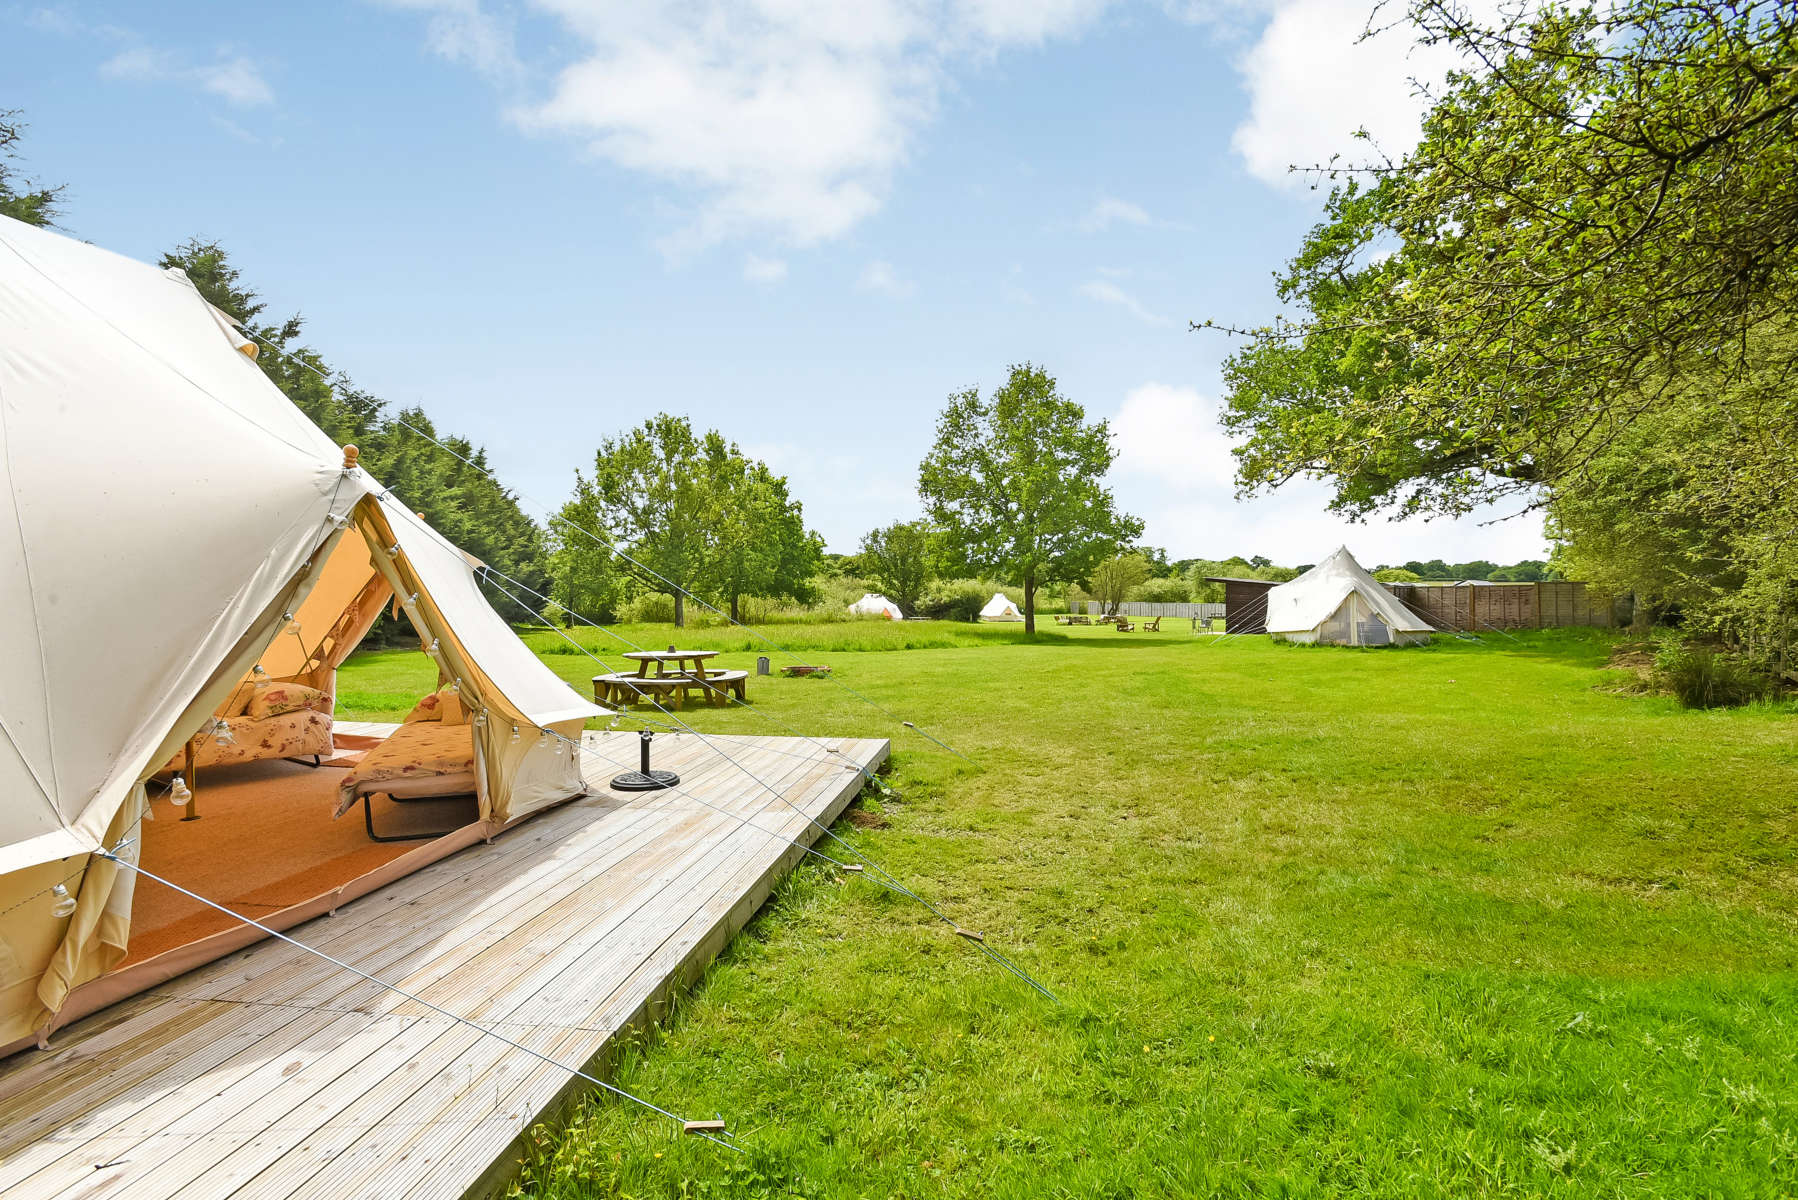 Group Glamping Kent - Hipcamp in Bethersden, England